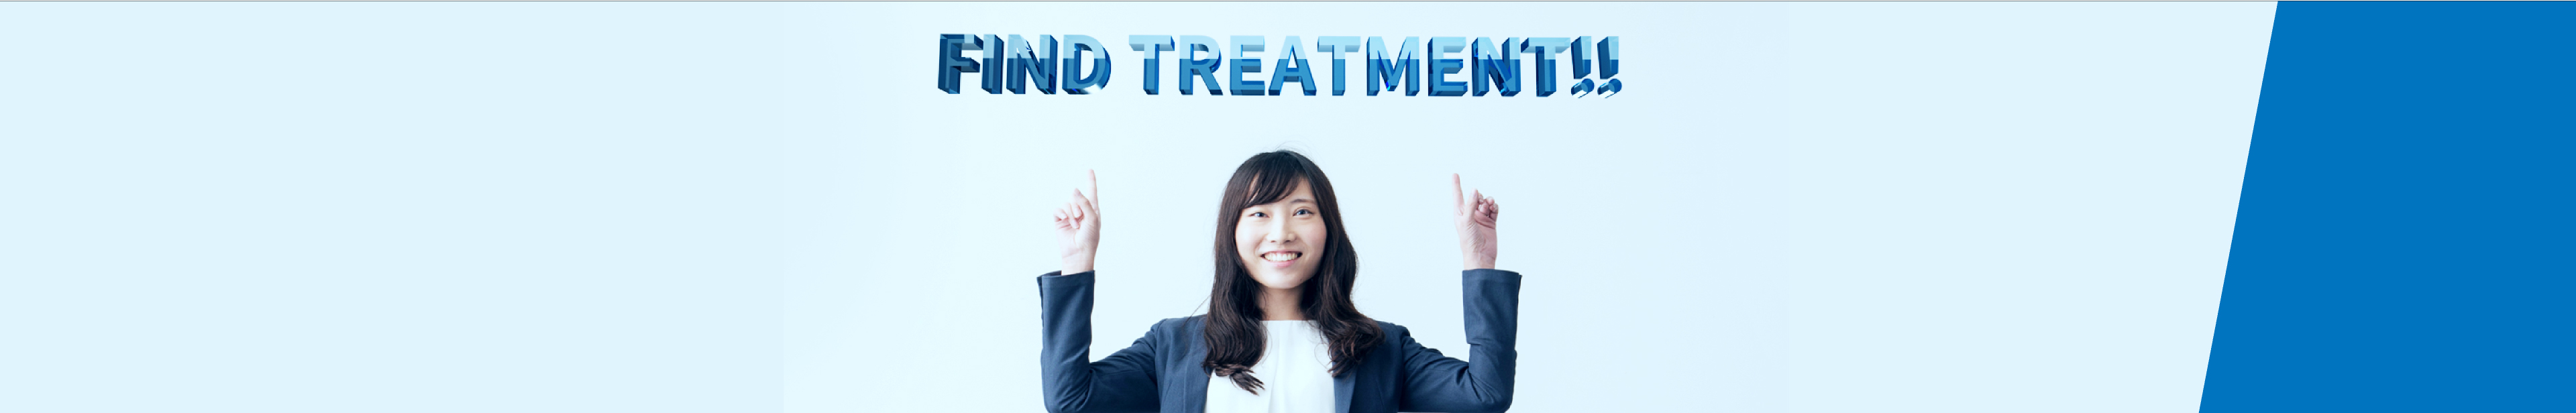 FIND TREATMENT!!